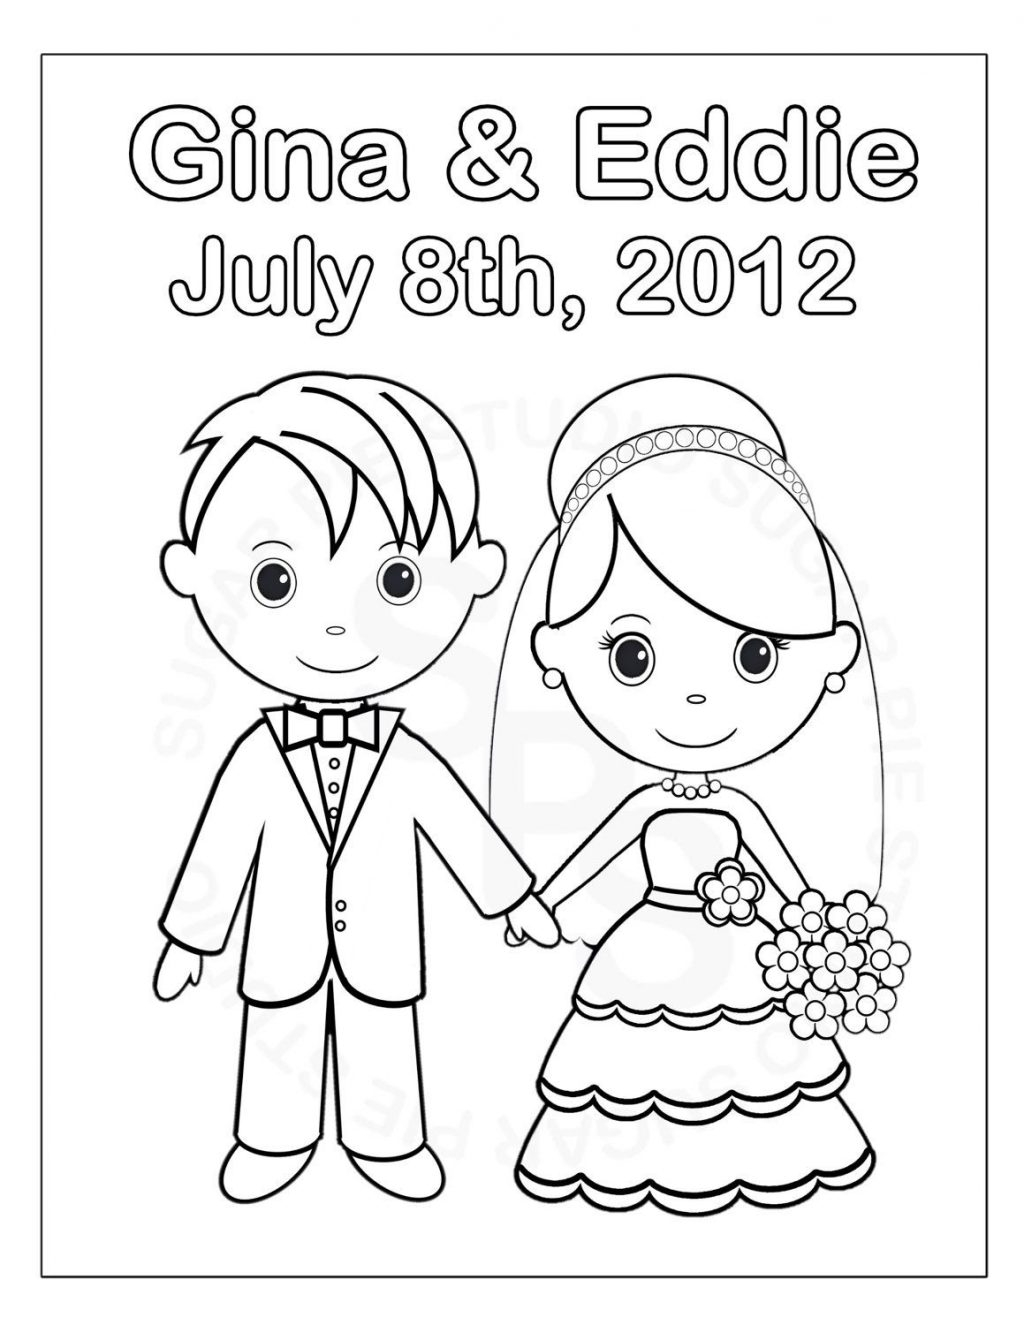 Wedding Activity Coloring Pages Coloring Pages Personalized Printable Bride Groom Wedding Party